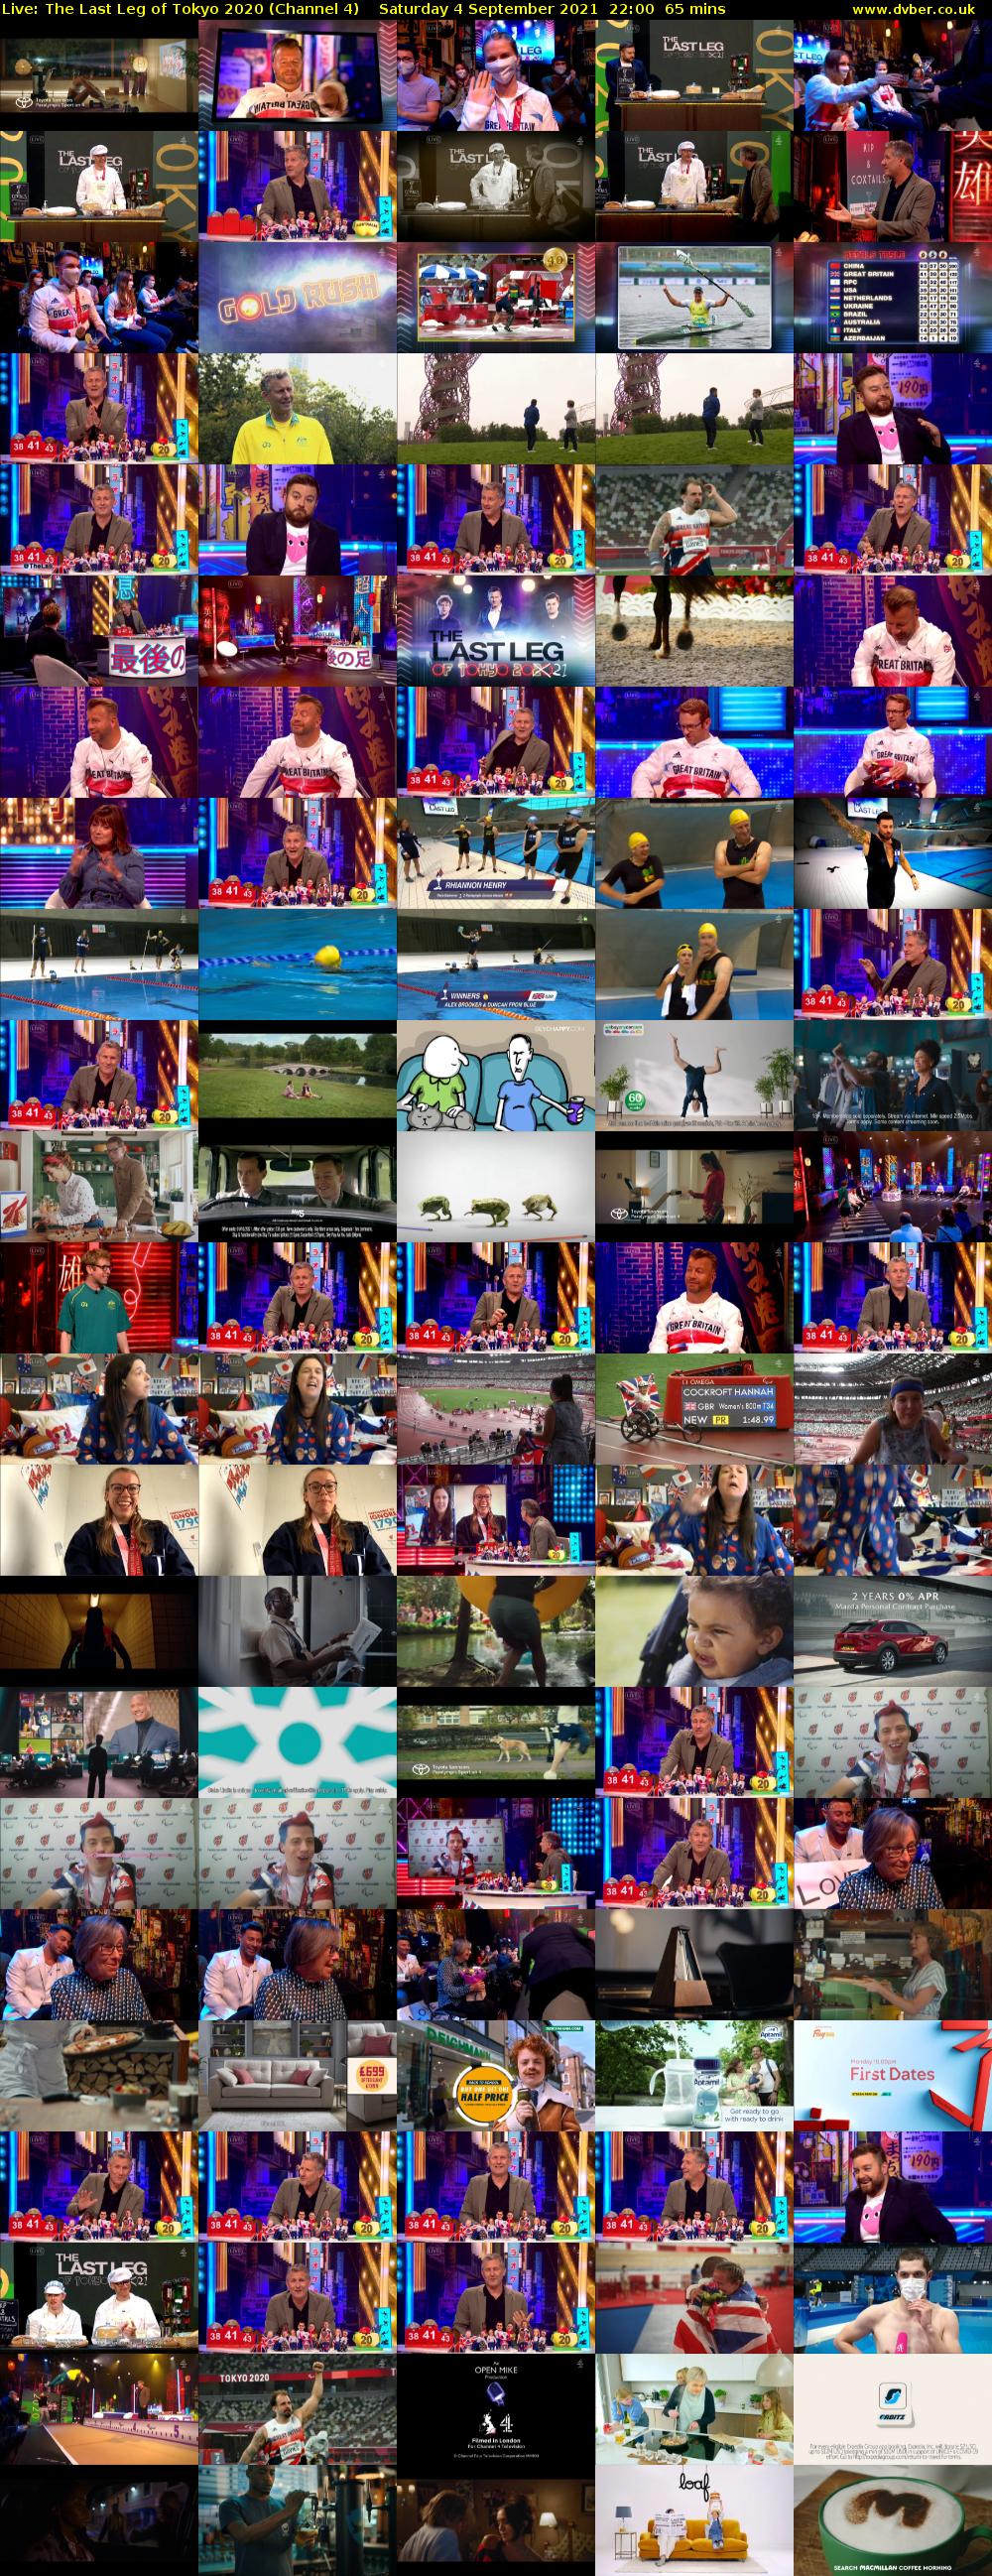 Live: The Last Leg of Tokyo 2020 (Channel 4) Saturday 4 September 2021 22:00 - 23:05